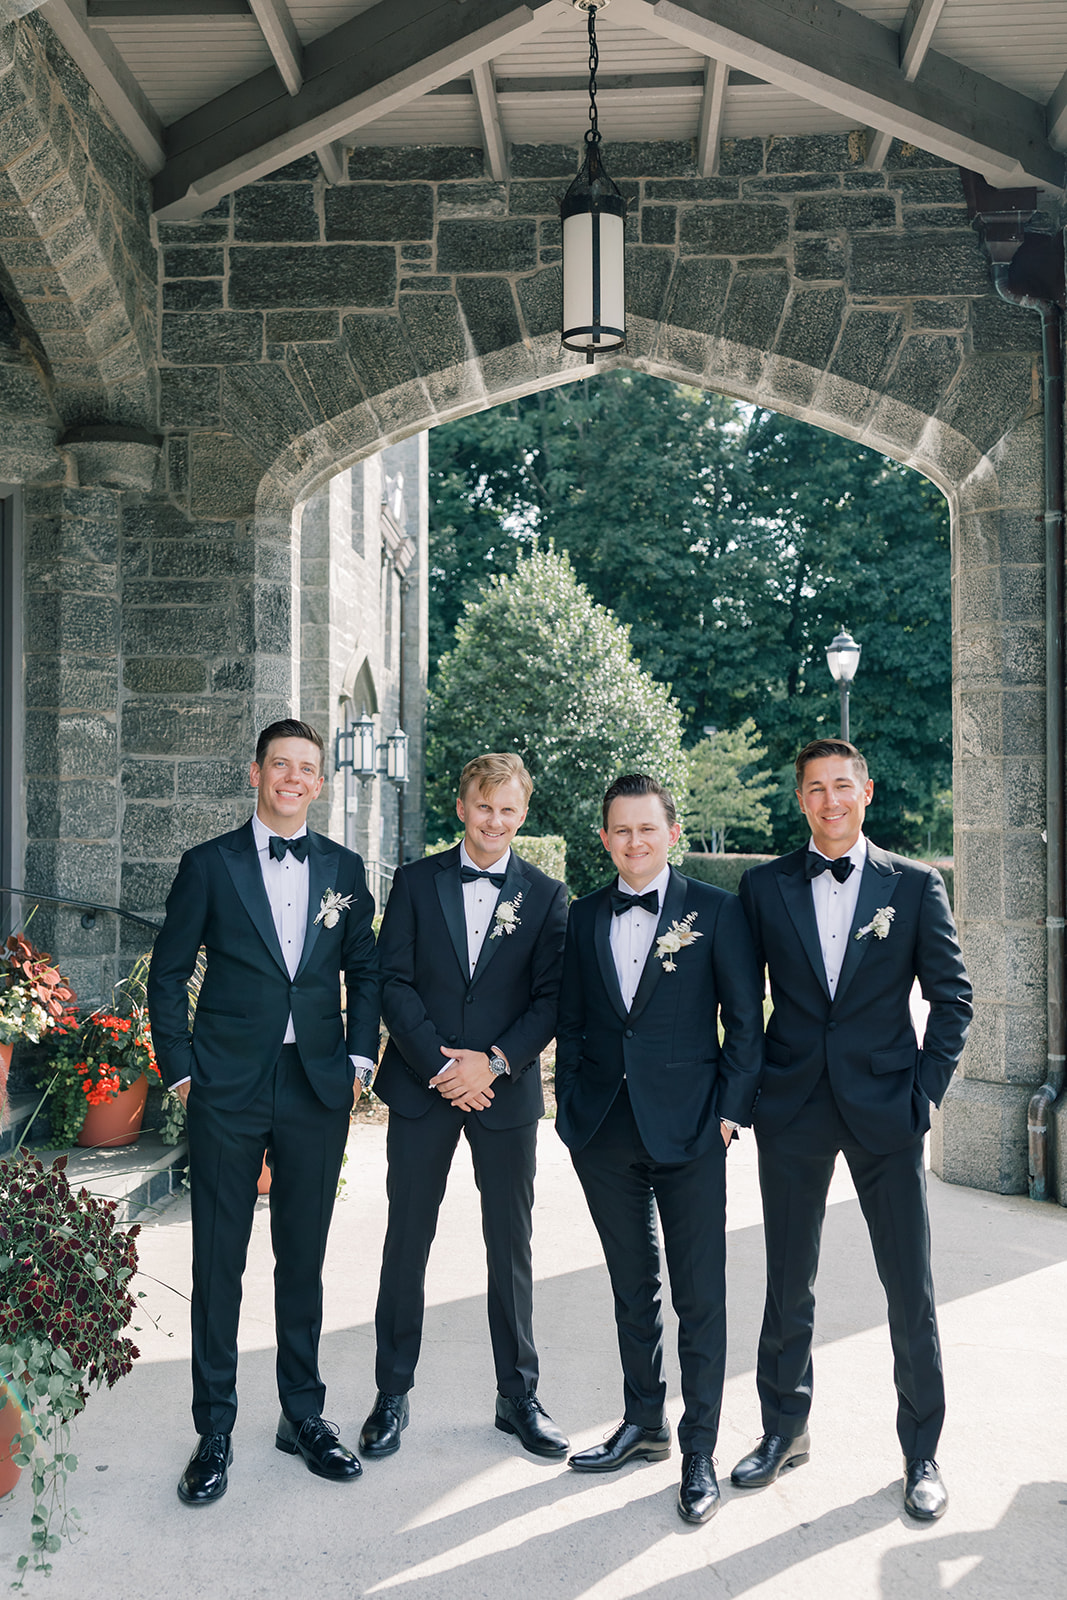 wedding party portraits at whitby castle in rye ny